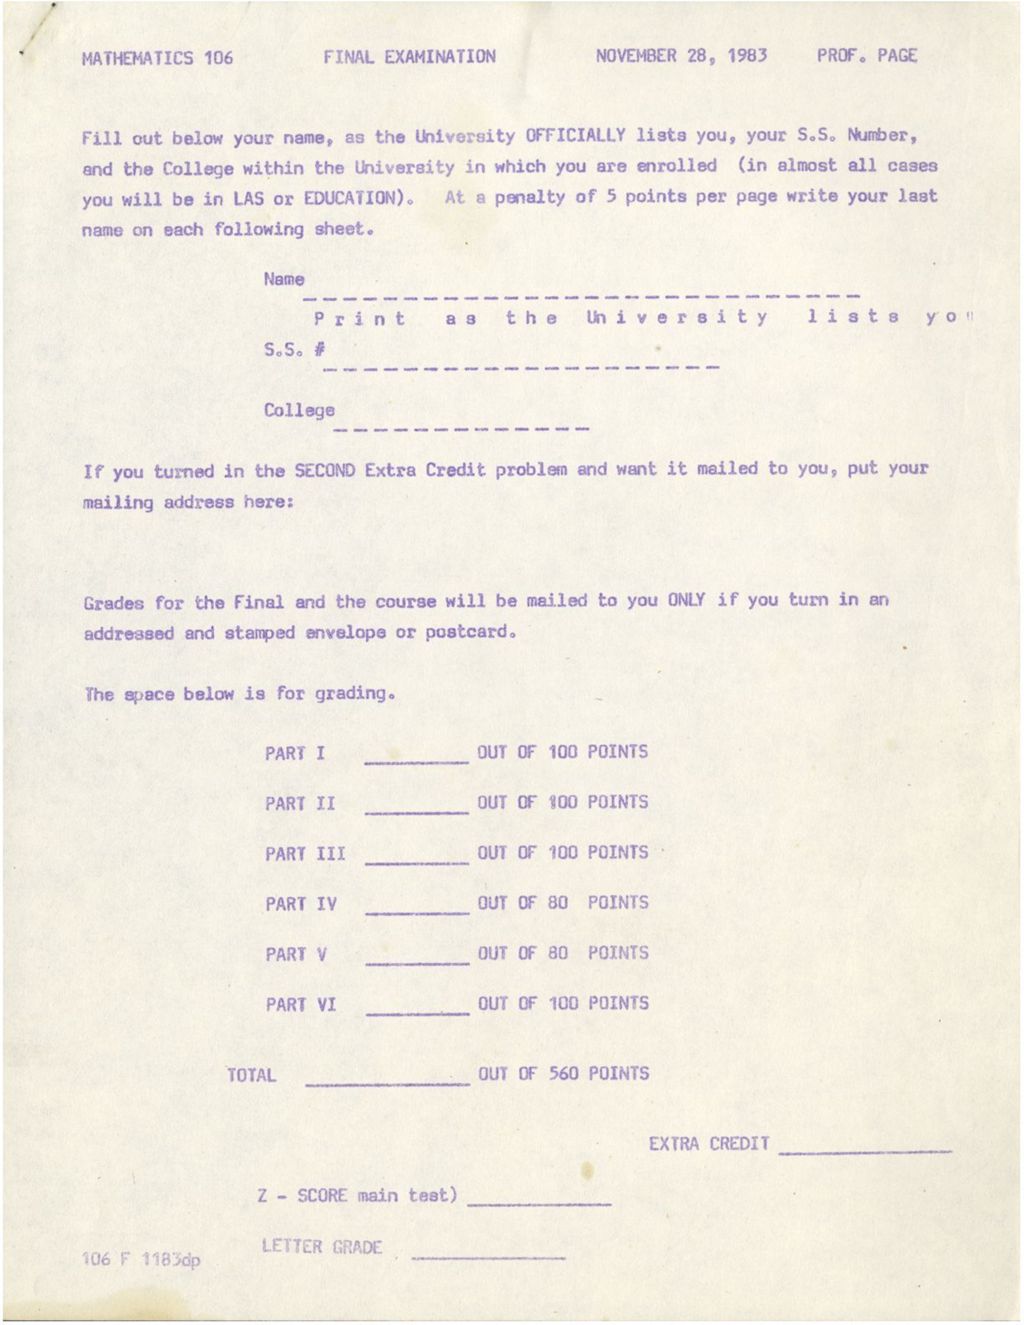 Miniature of Mathematics 106 Final Exam 1983 (bases, number theory, unit conversions)